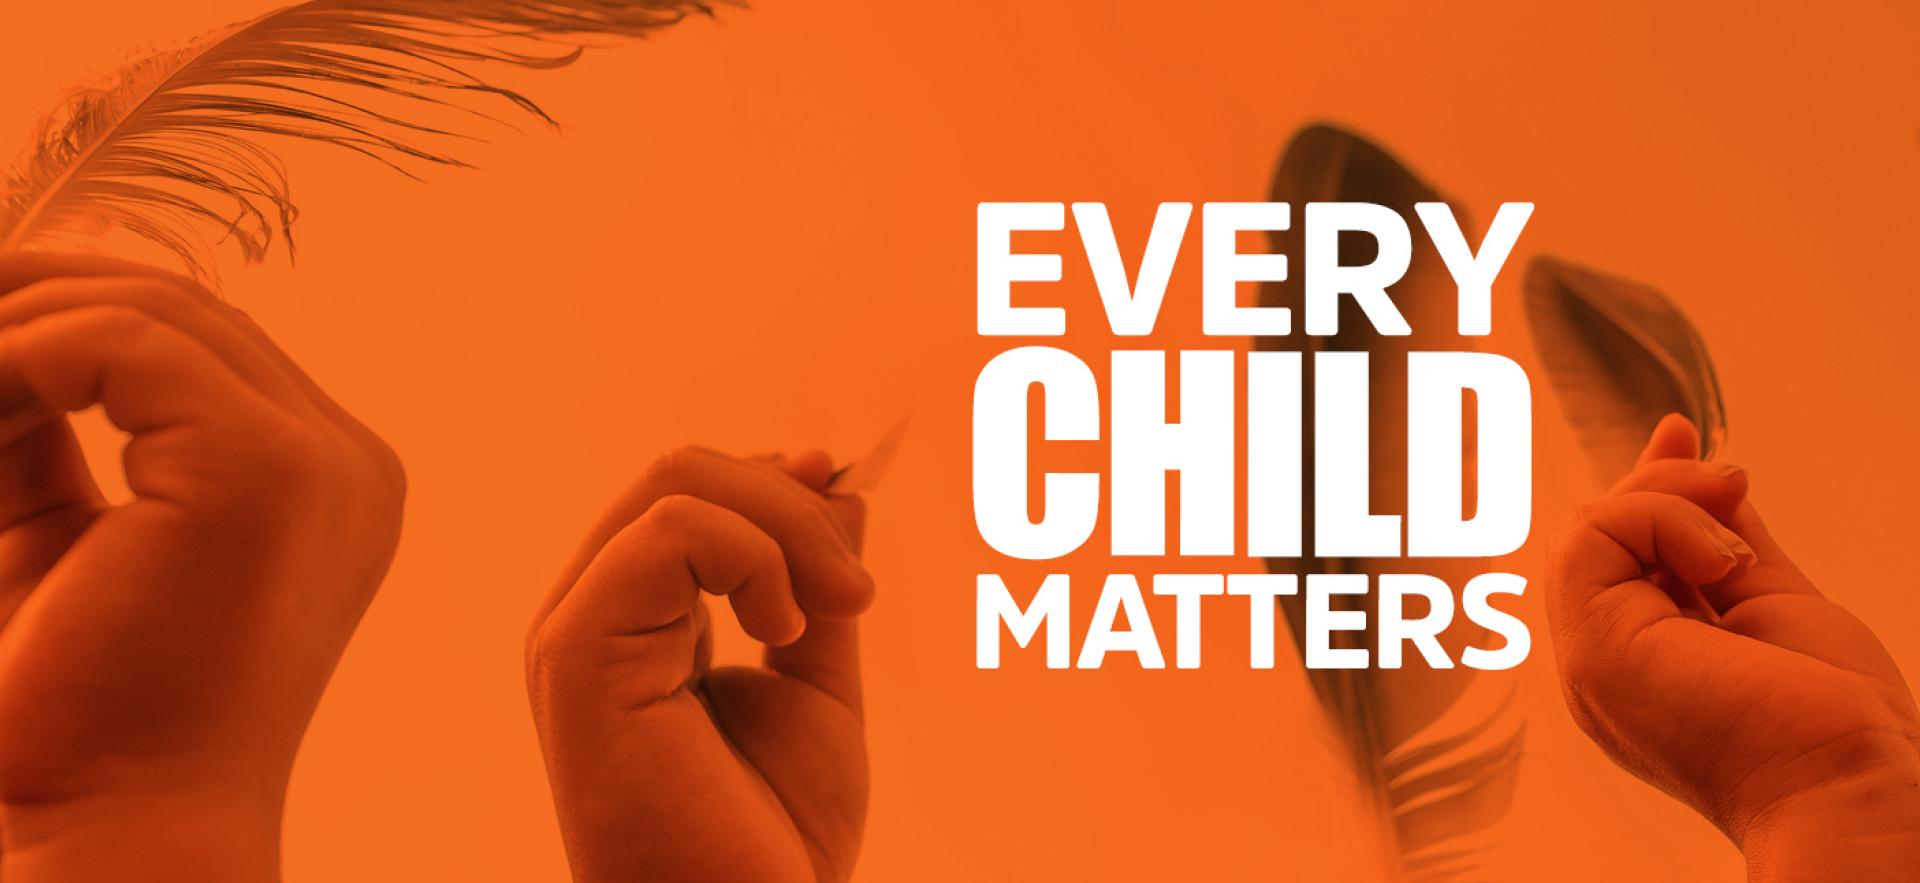 Photo with orange background and children's hands holding up feathers with text in the centre that says Every Child Matters